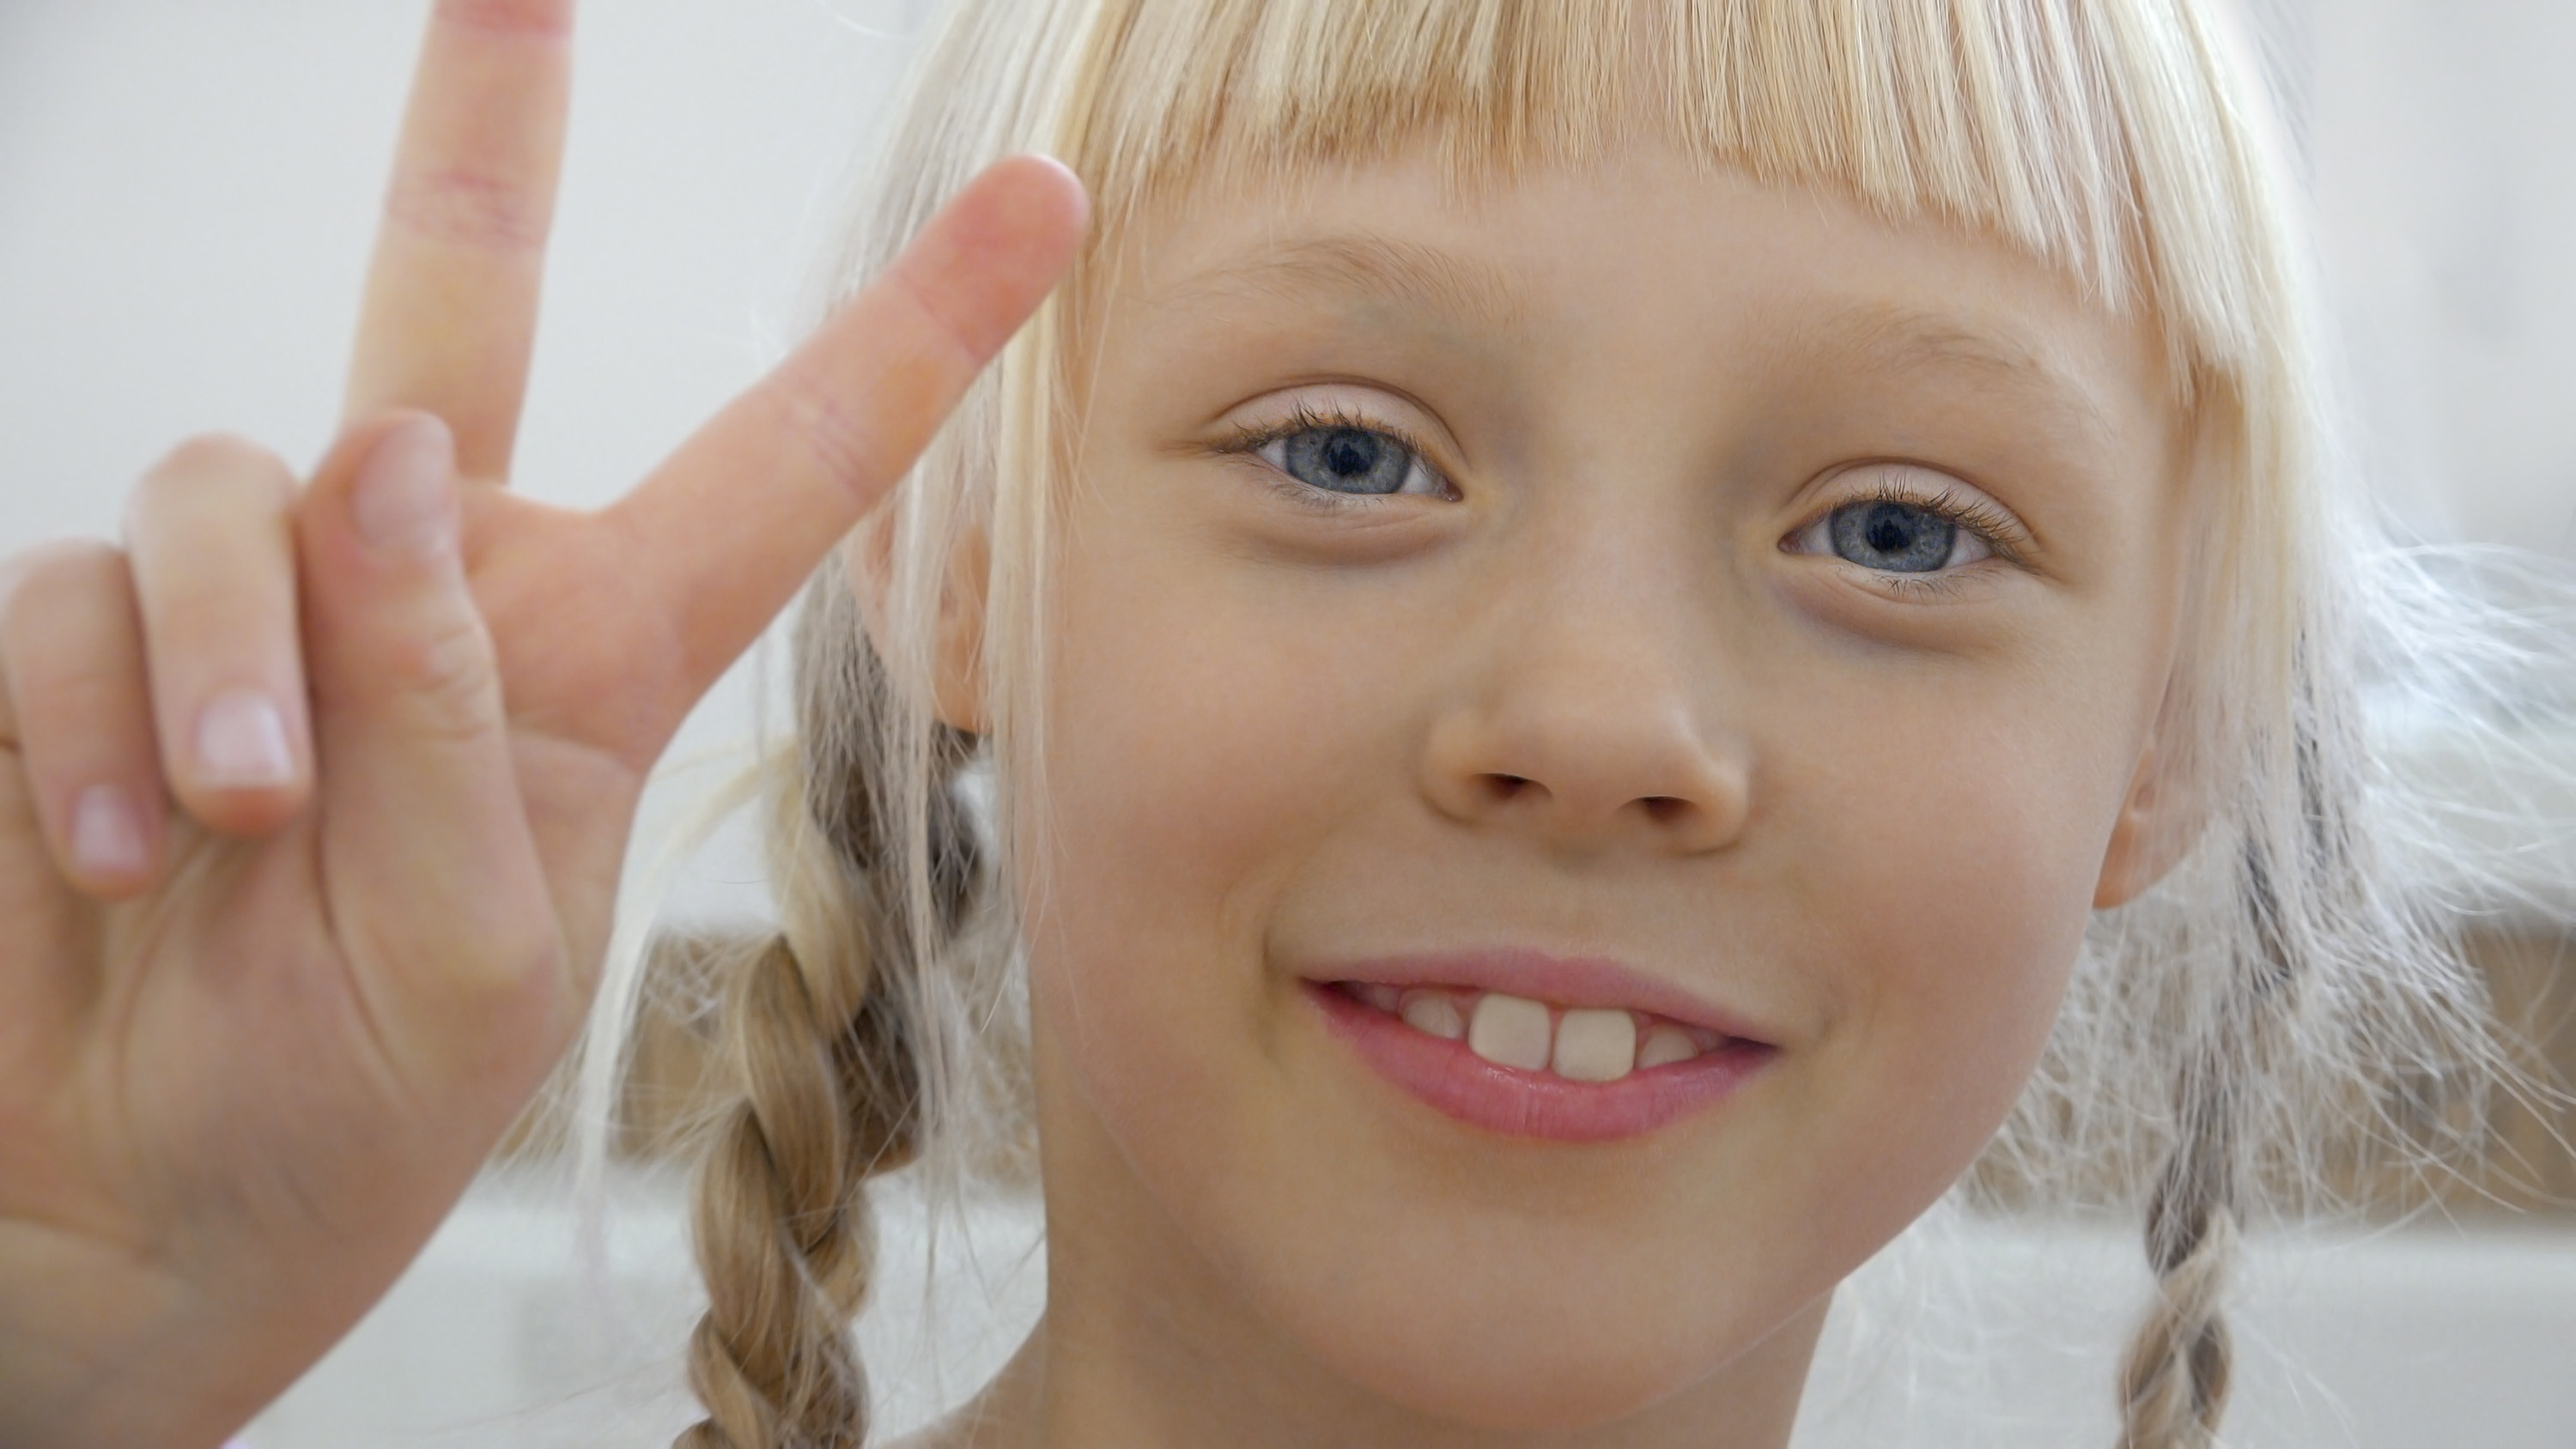 Little white girl with blonde hair doing a peace sign